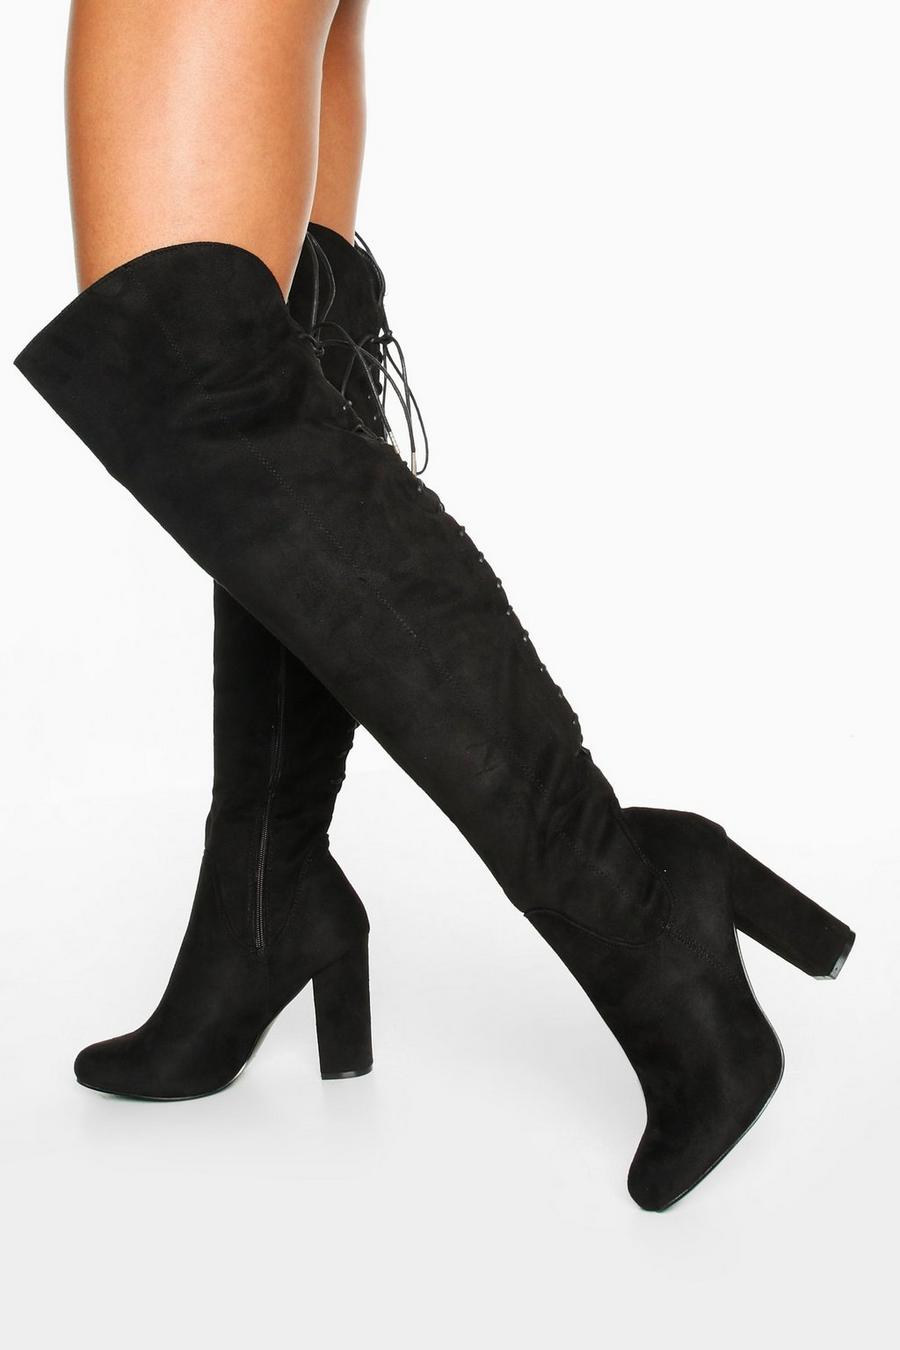 Knee High Boots With Heel | stickhealthcare.co.uk